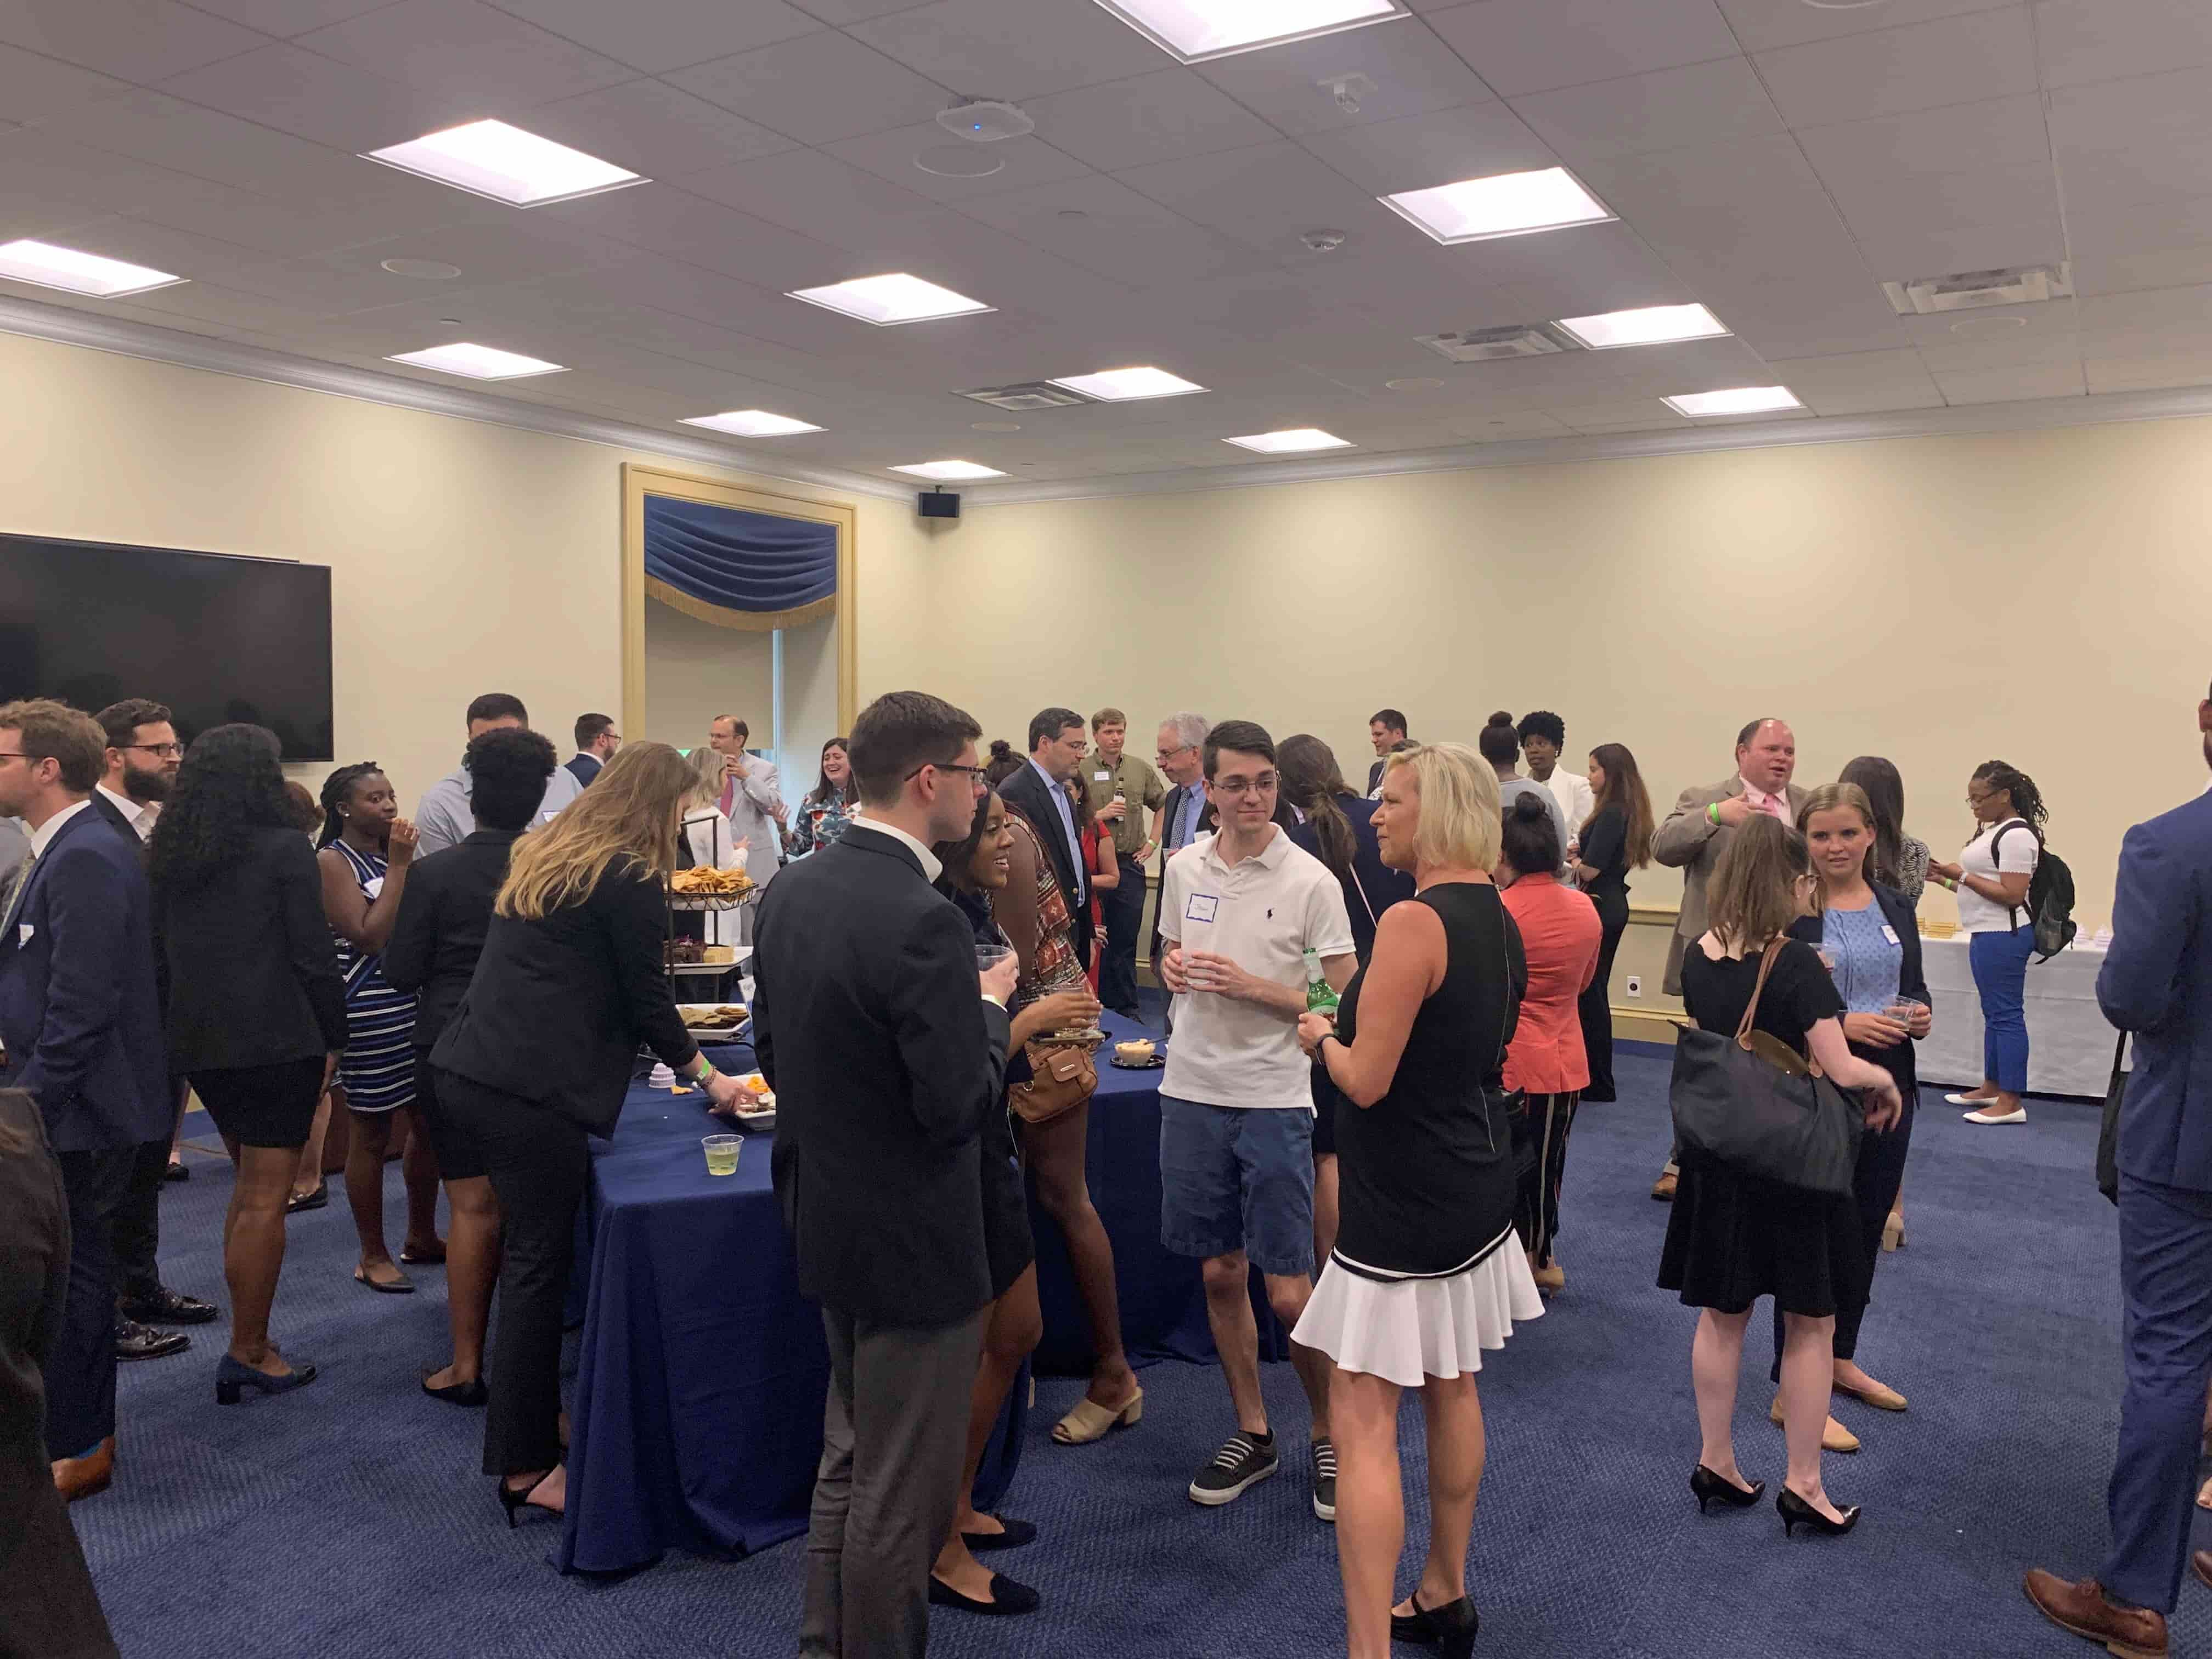 Attendees of the Happy Hour on the Hill event mingle with snacks and drinks